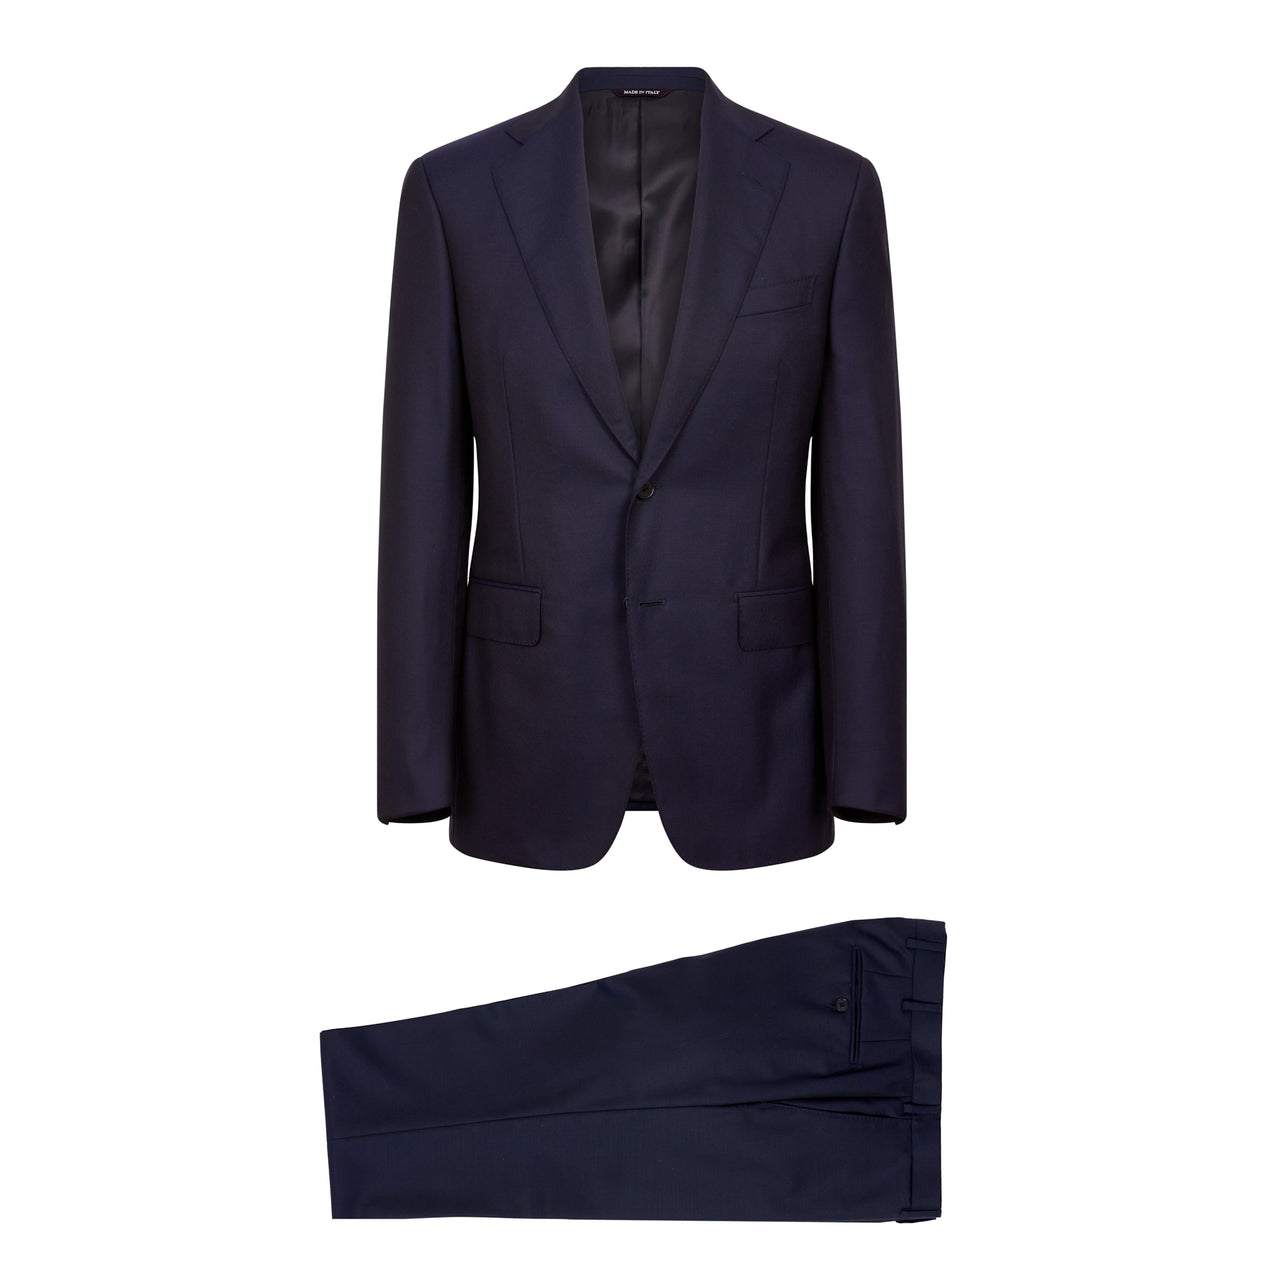 HENRY SARTORIAL HERITAGE Dormeuil Travel Resistant™ Full Canvas Notch Lapel Suit NAVY